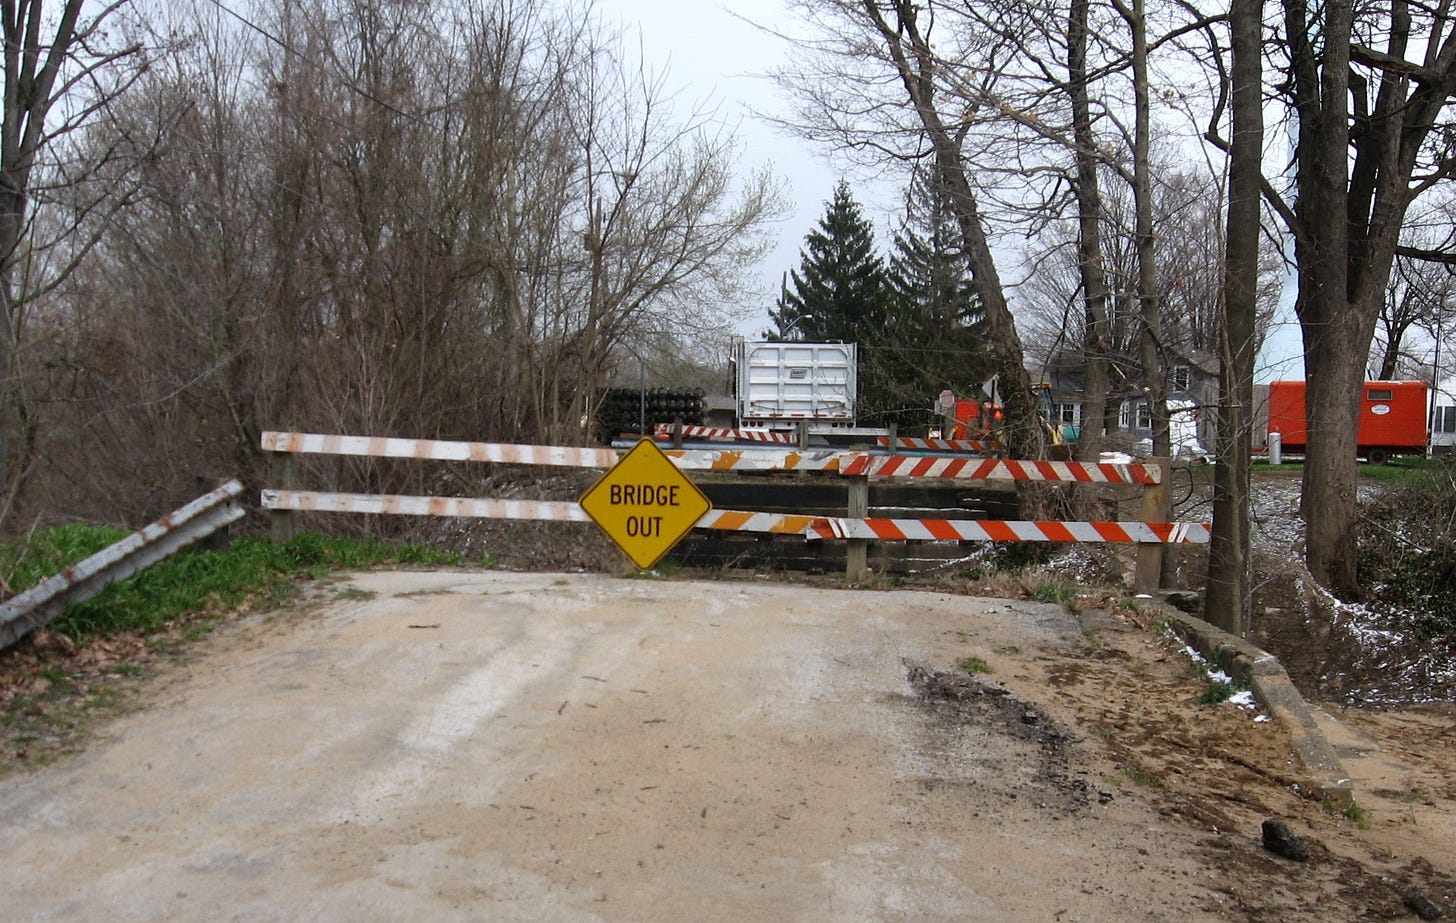 A dirt road leads up to an orange-and-white road block with a yellow sign on it reading "BRIDGE OUT." There are trees without leaves in the background and the sky is gray.